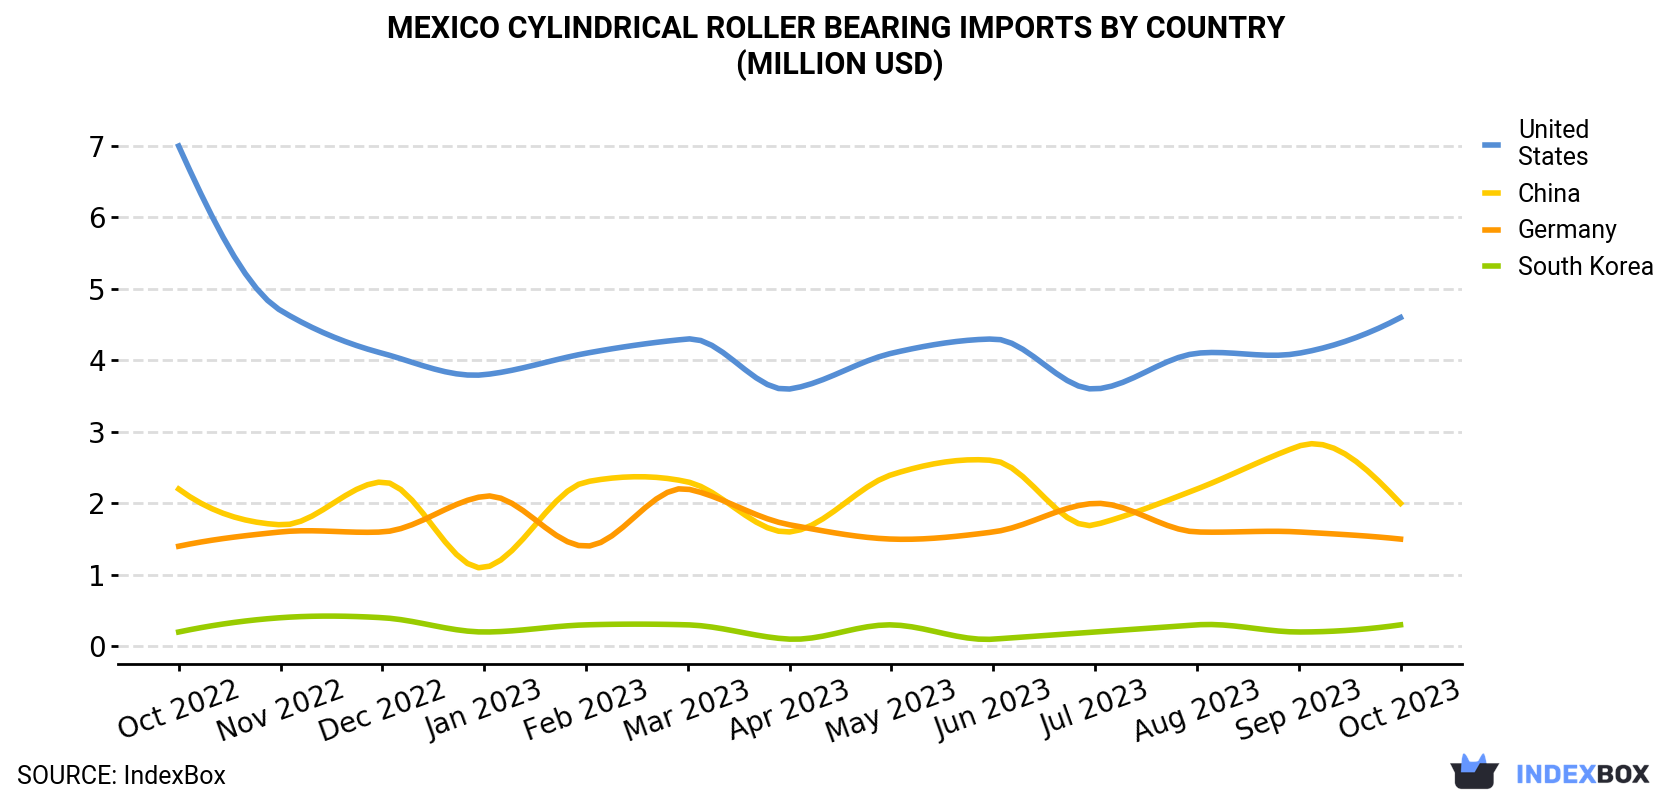 Mexico Cylindrical Roller Bearing Imports By Country (Million USD)